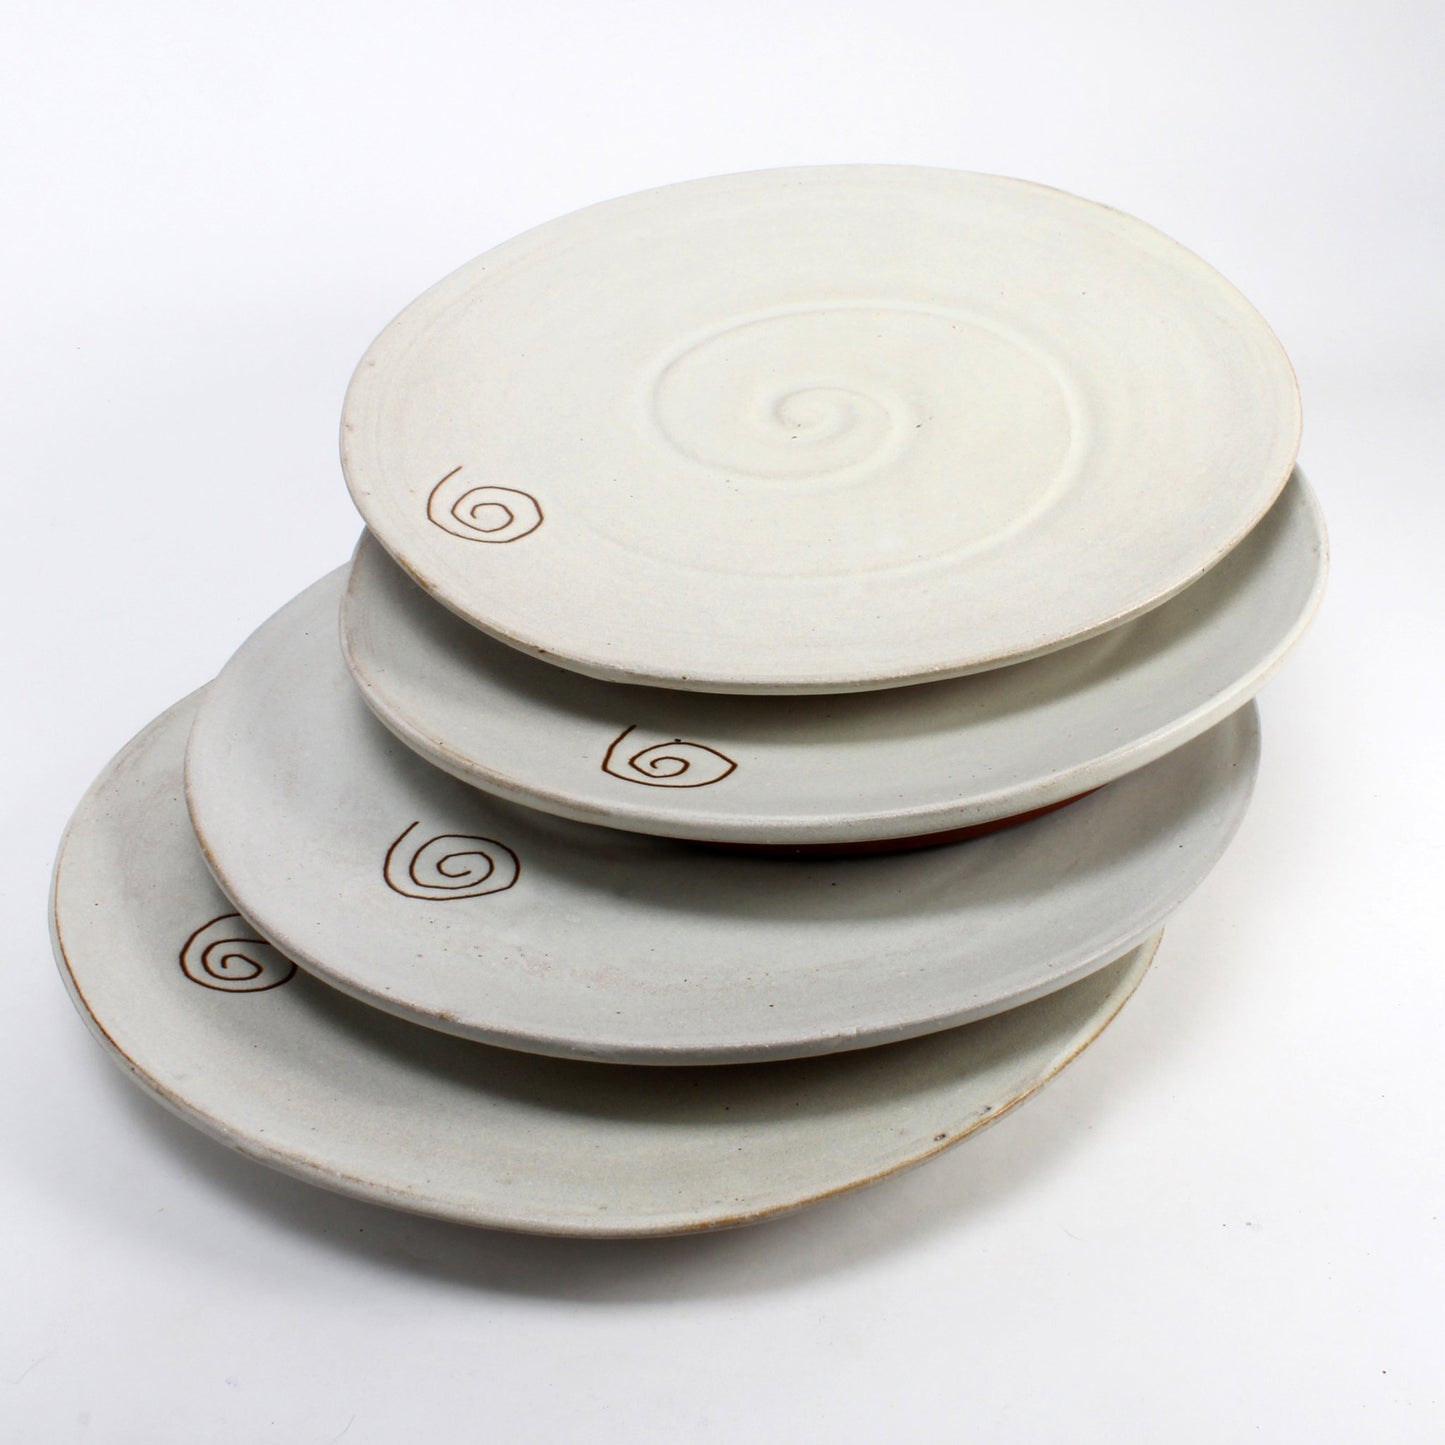 Dinner Plates - White with Spiral Design - Set of 4